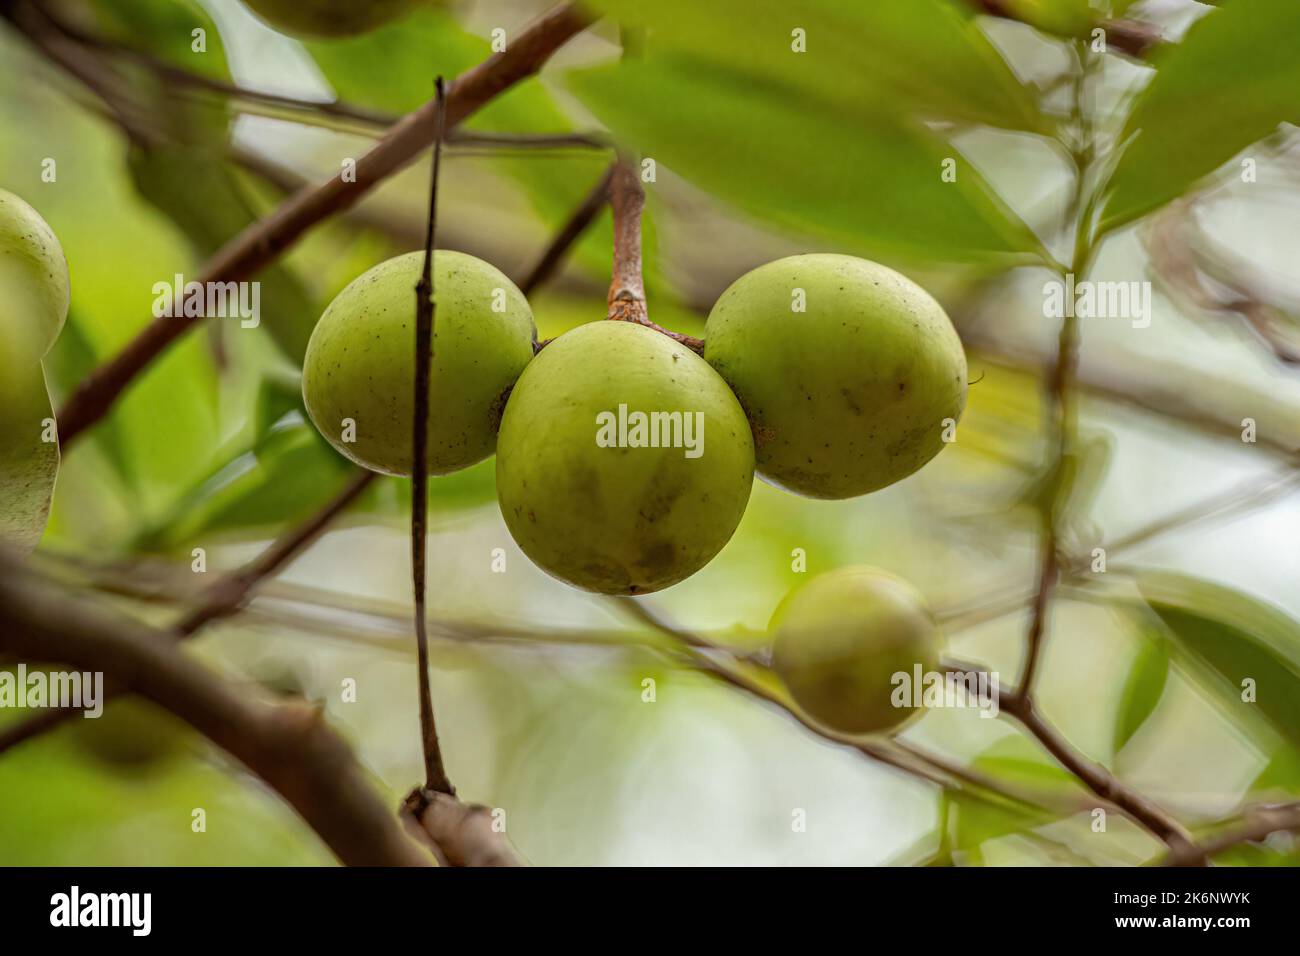 Tree with fruits called Mangaba of the species Hancornia speciosa with selective focus Stock Photo